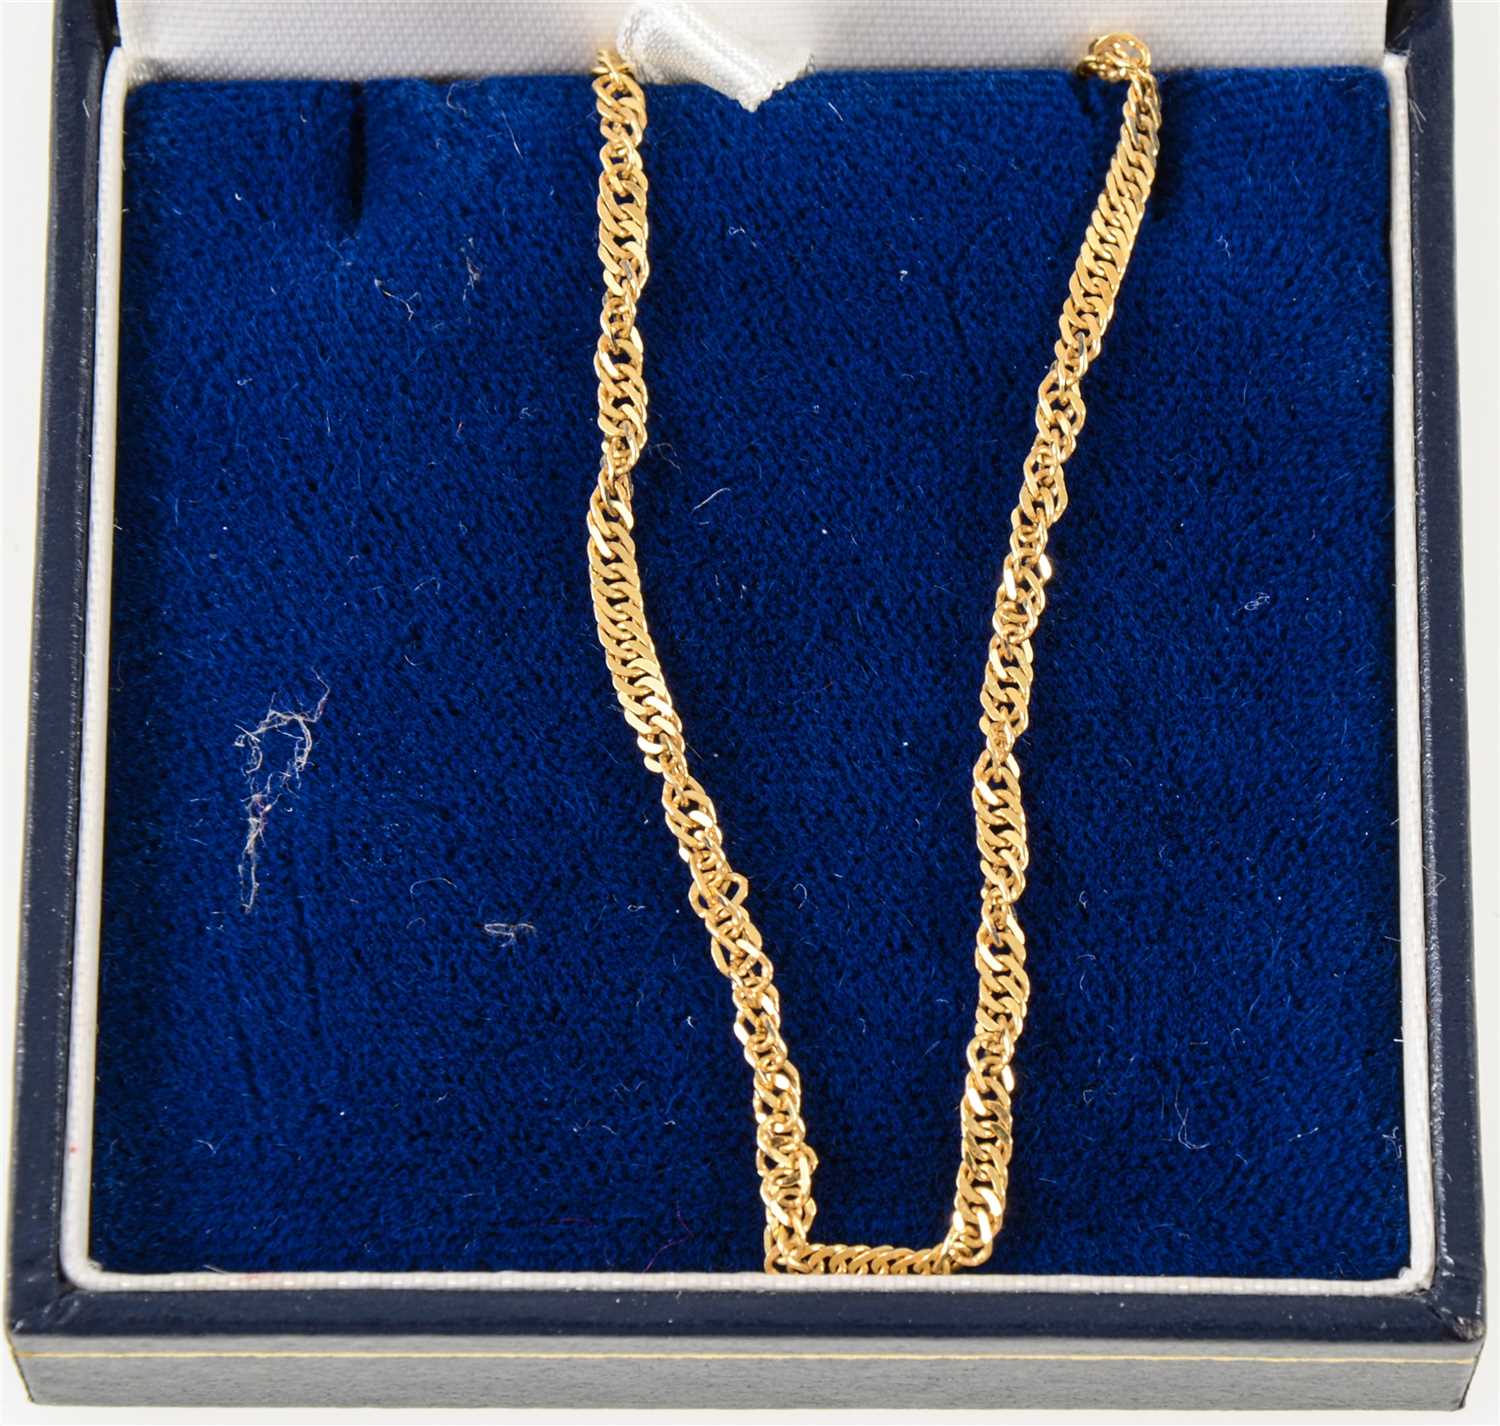 Lot 267 - An 18 carat yellow gold chain necklace, twisted flat curb link 44cm long, approximate weight 4.9gms.